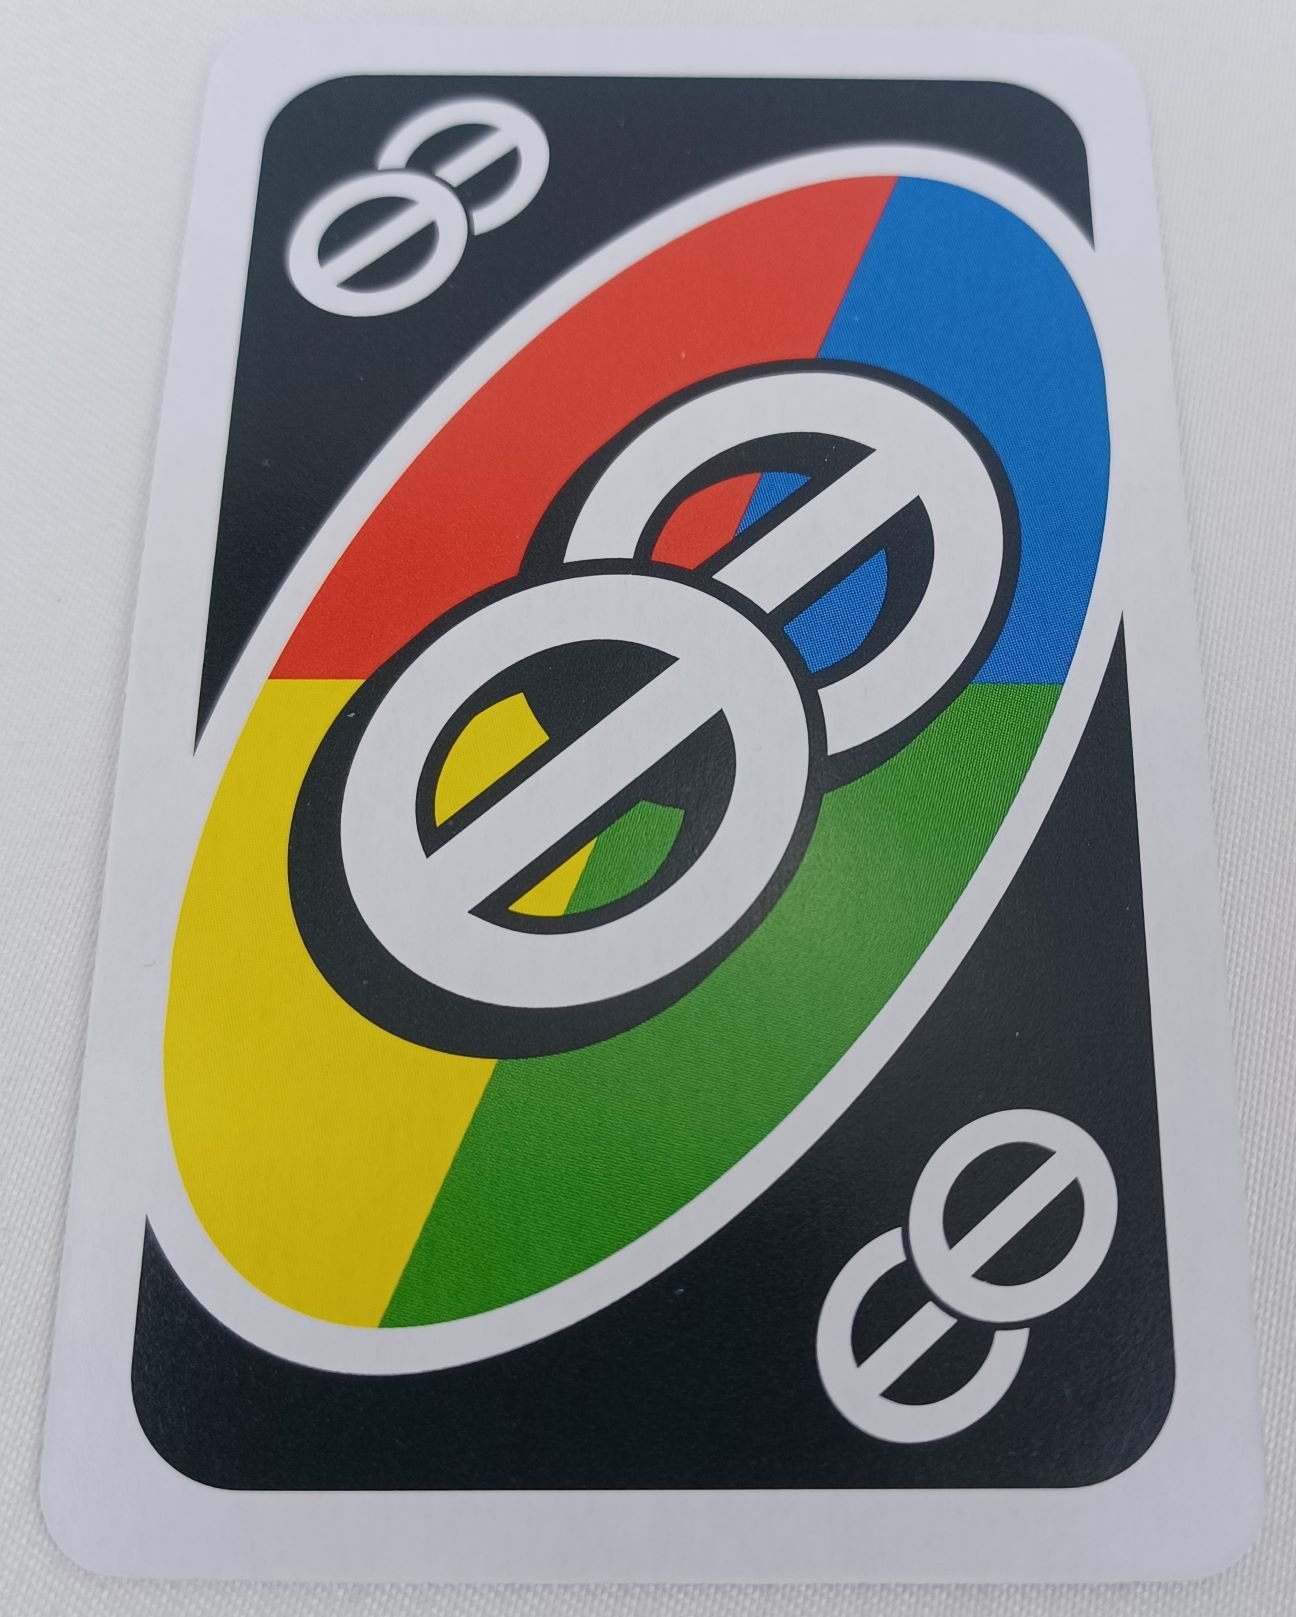 uno-all-wild-card-game-review-and-rules-geeky-hobbies